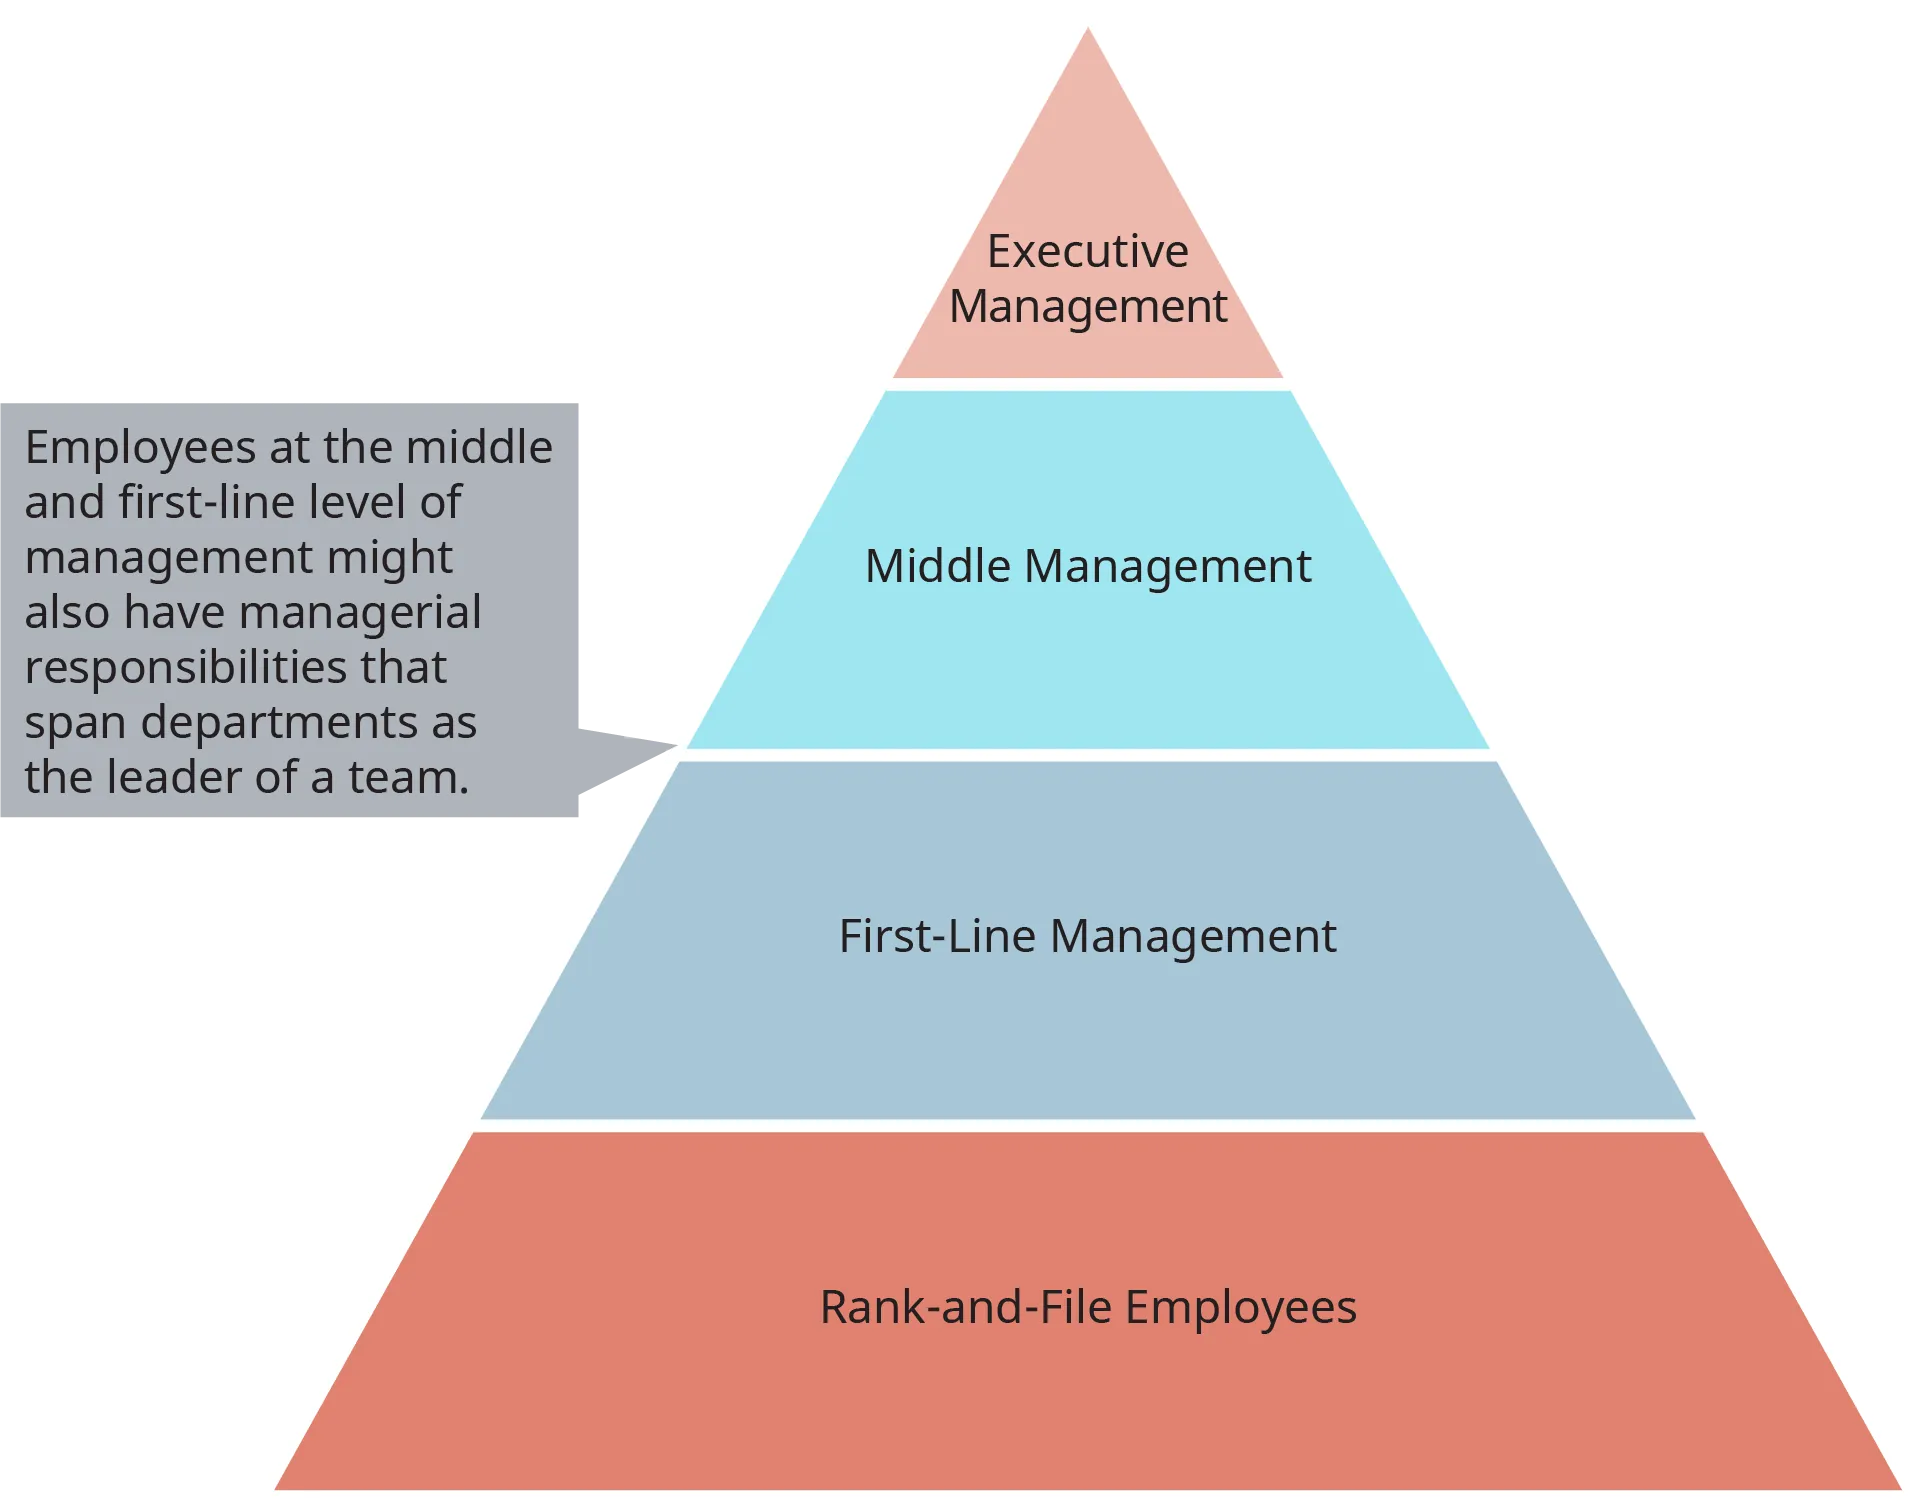 An illustration shows a pyramid representing differences in managerial activities by hierarchical level.